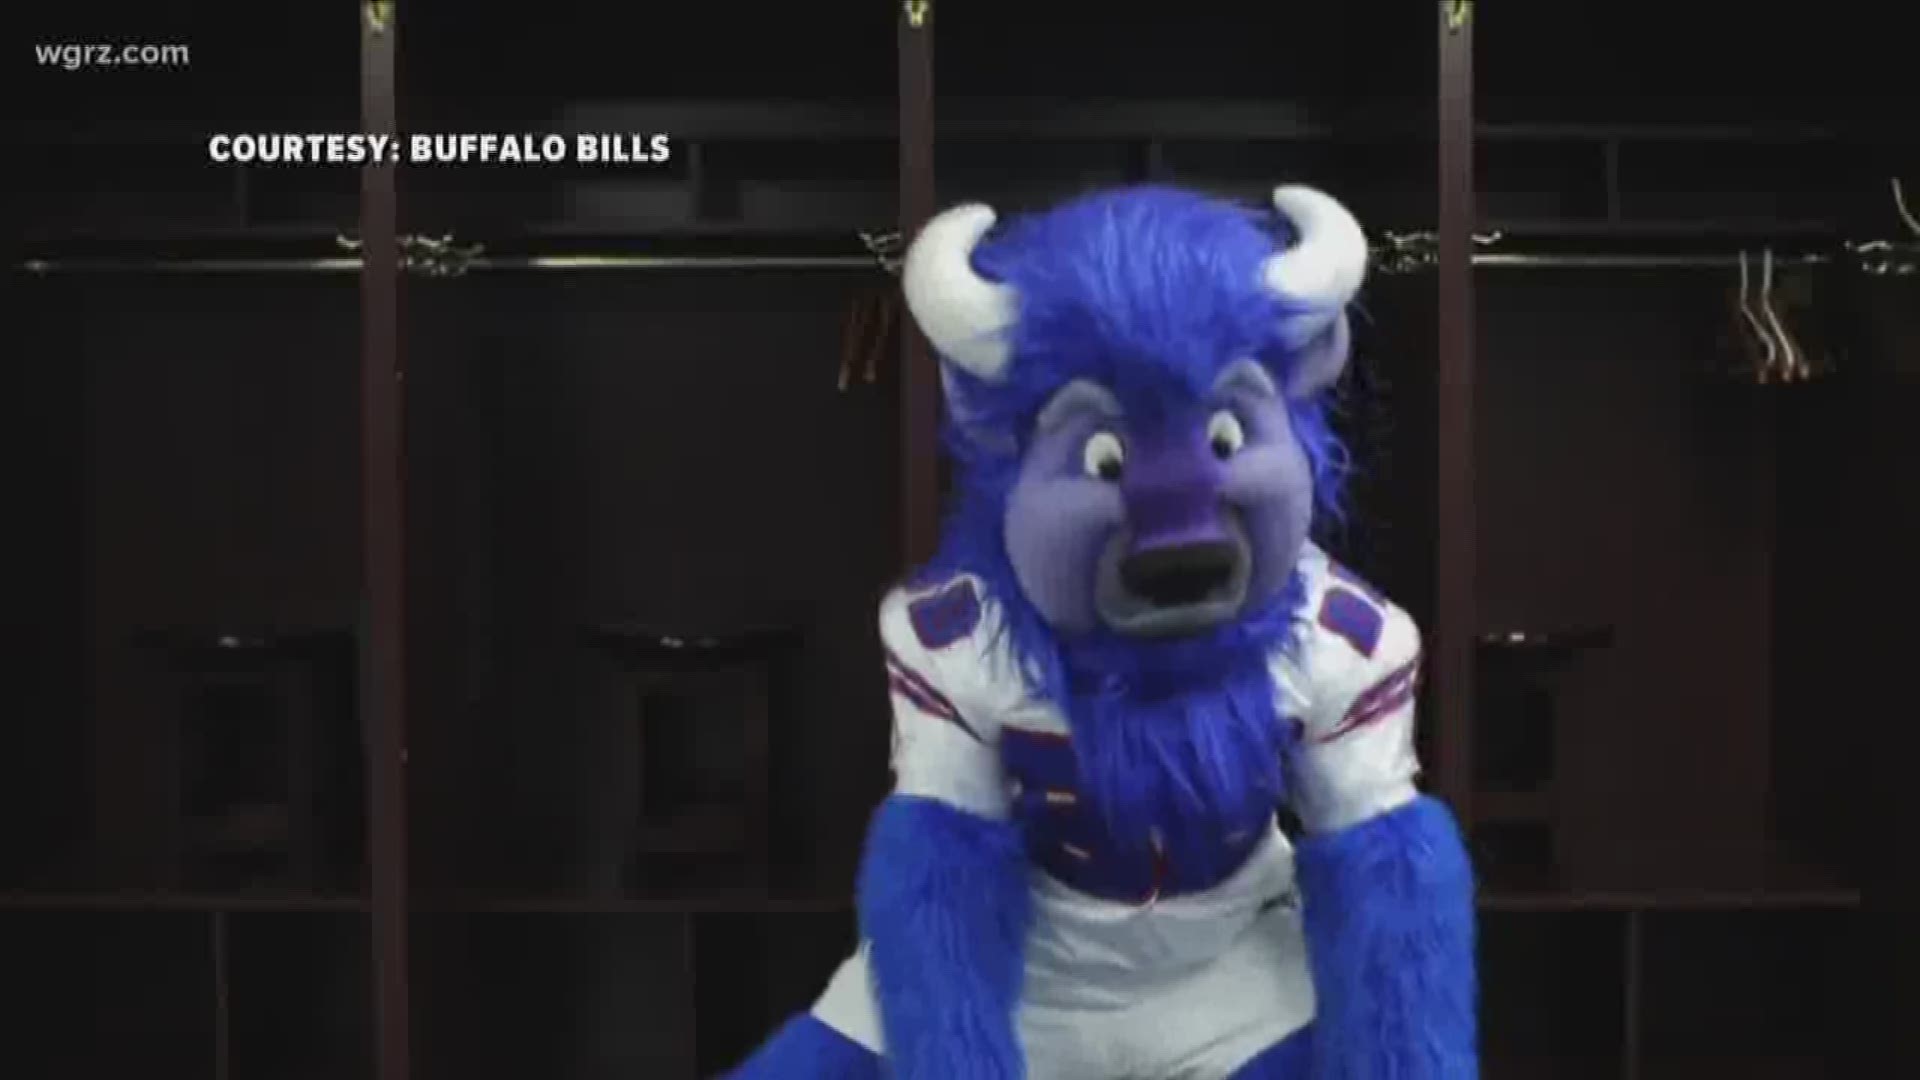 Need a job? The Bills are looking for someone to suit up as mascot